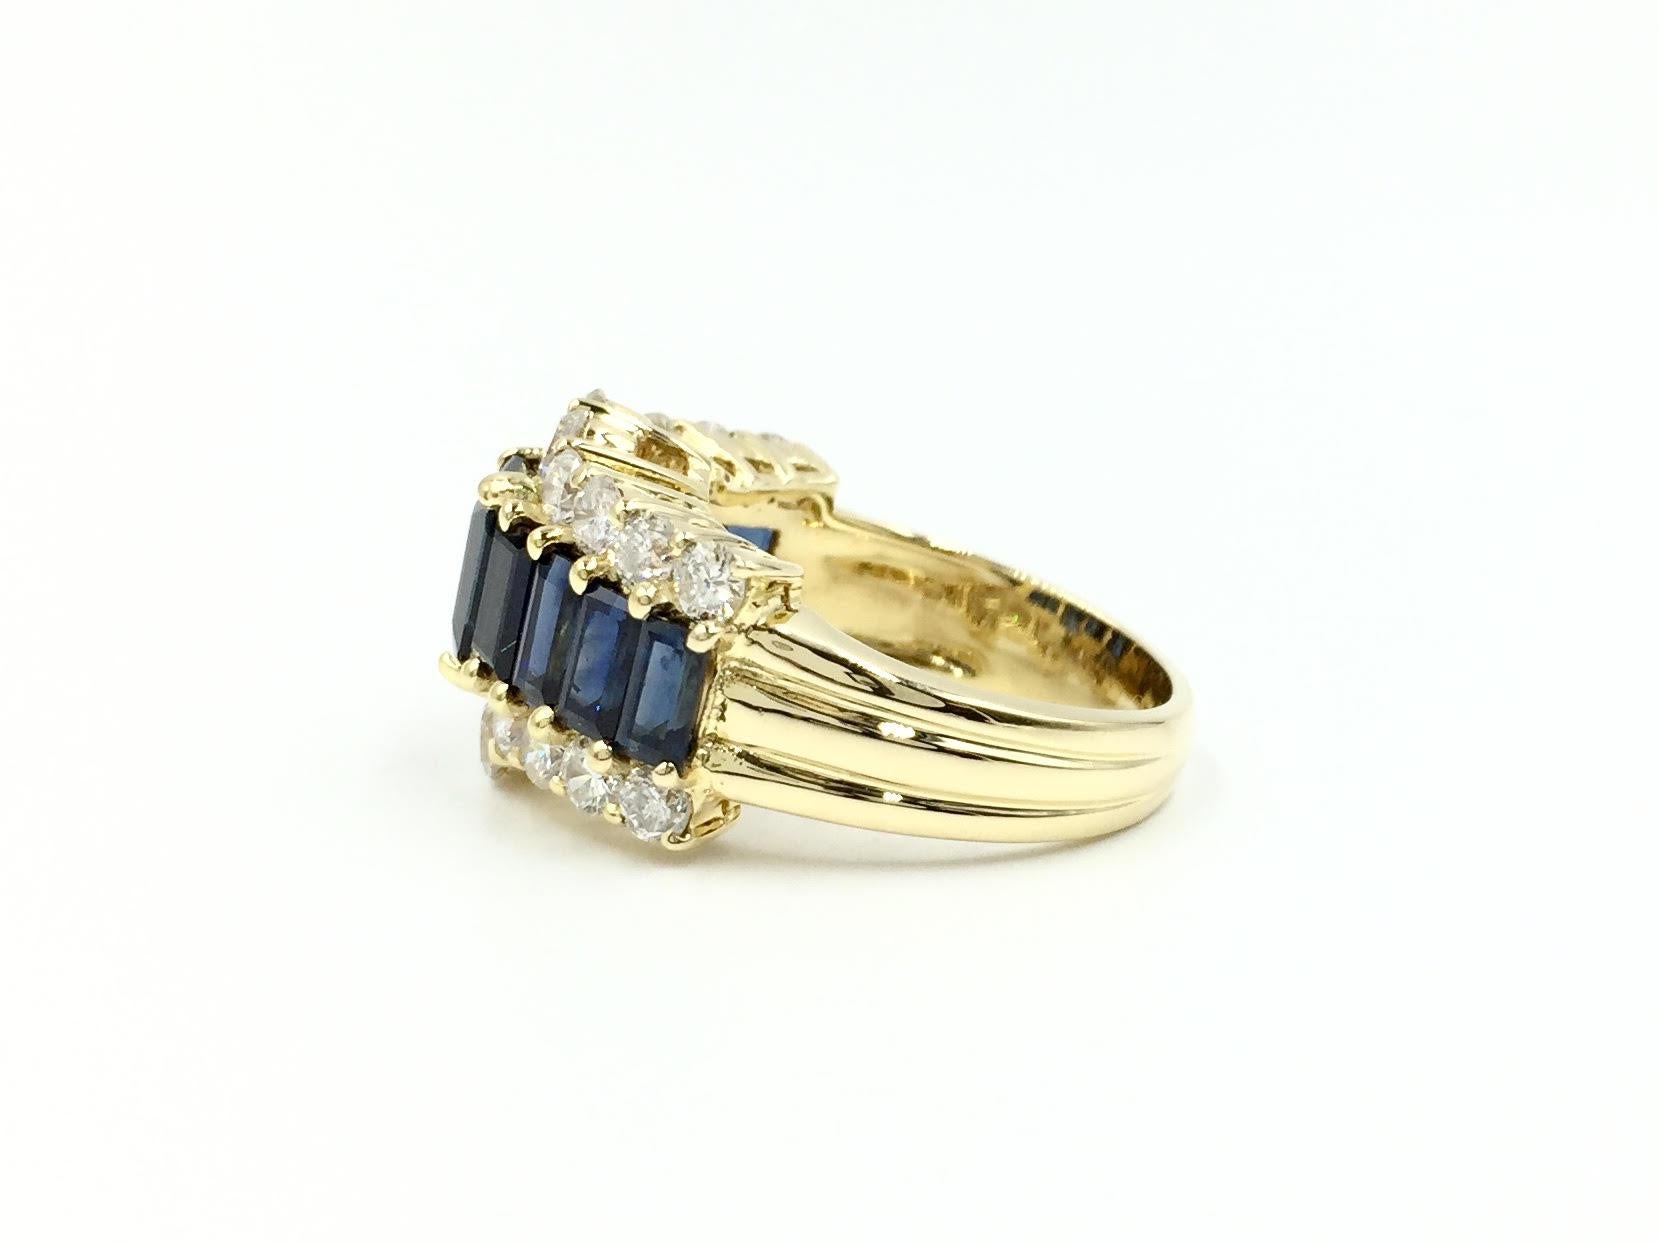 18 Karat Three-Row Diamond and Sapphire Ring In Excellent Condition For Sale In Pikesville, MD